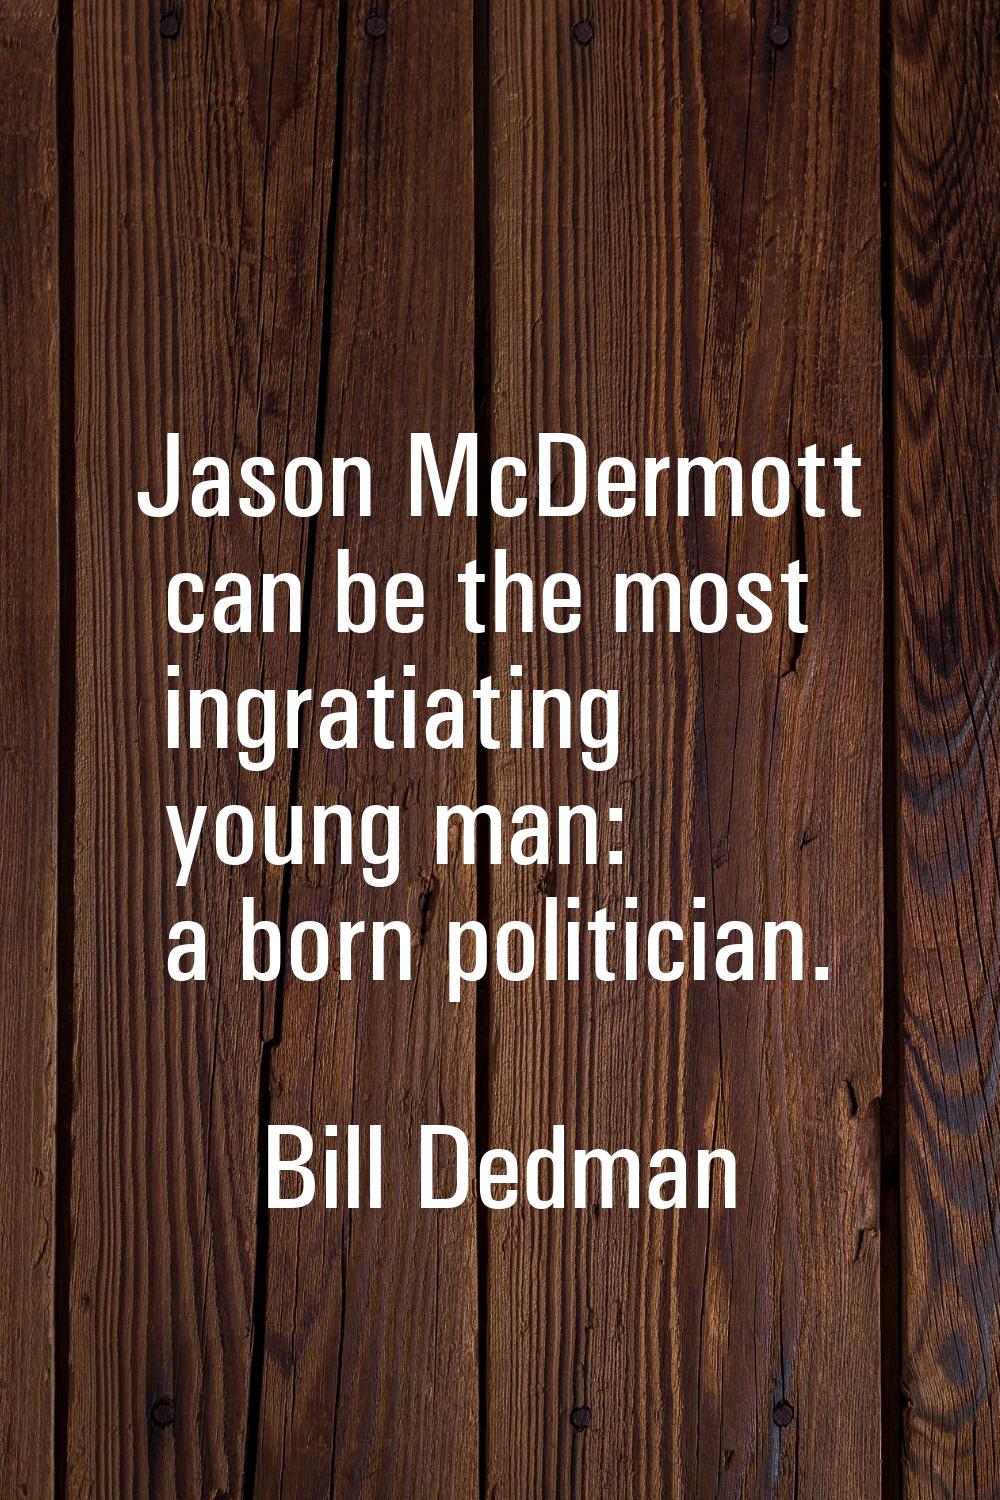 Jason McDermott can be the most ingratiating young man: a born politician.